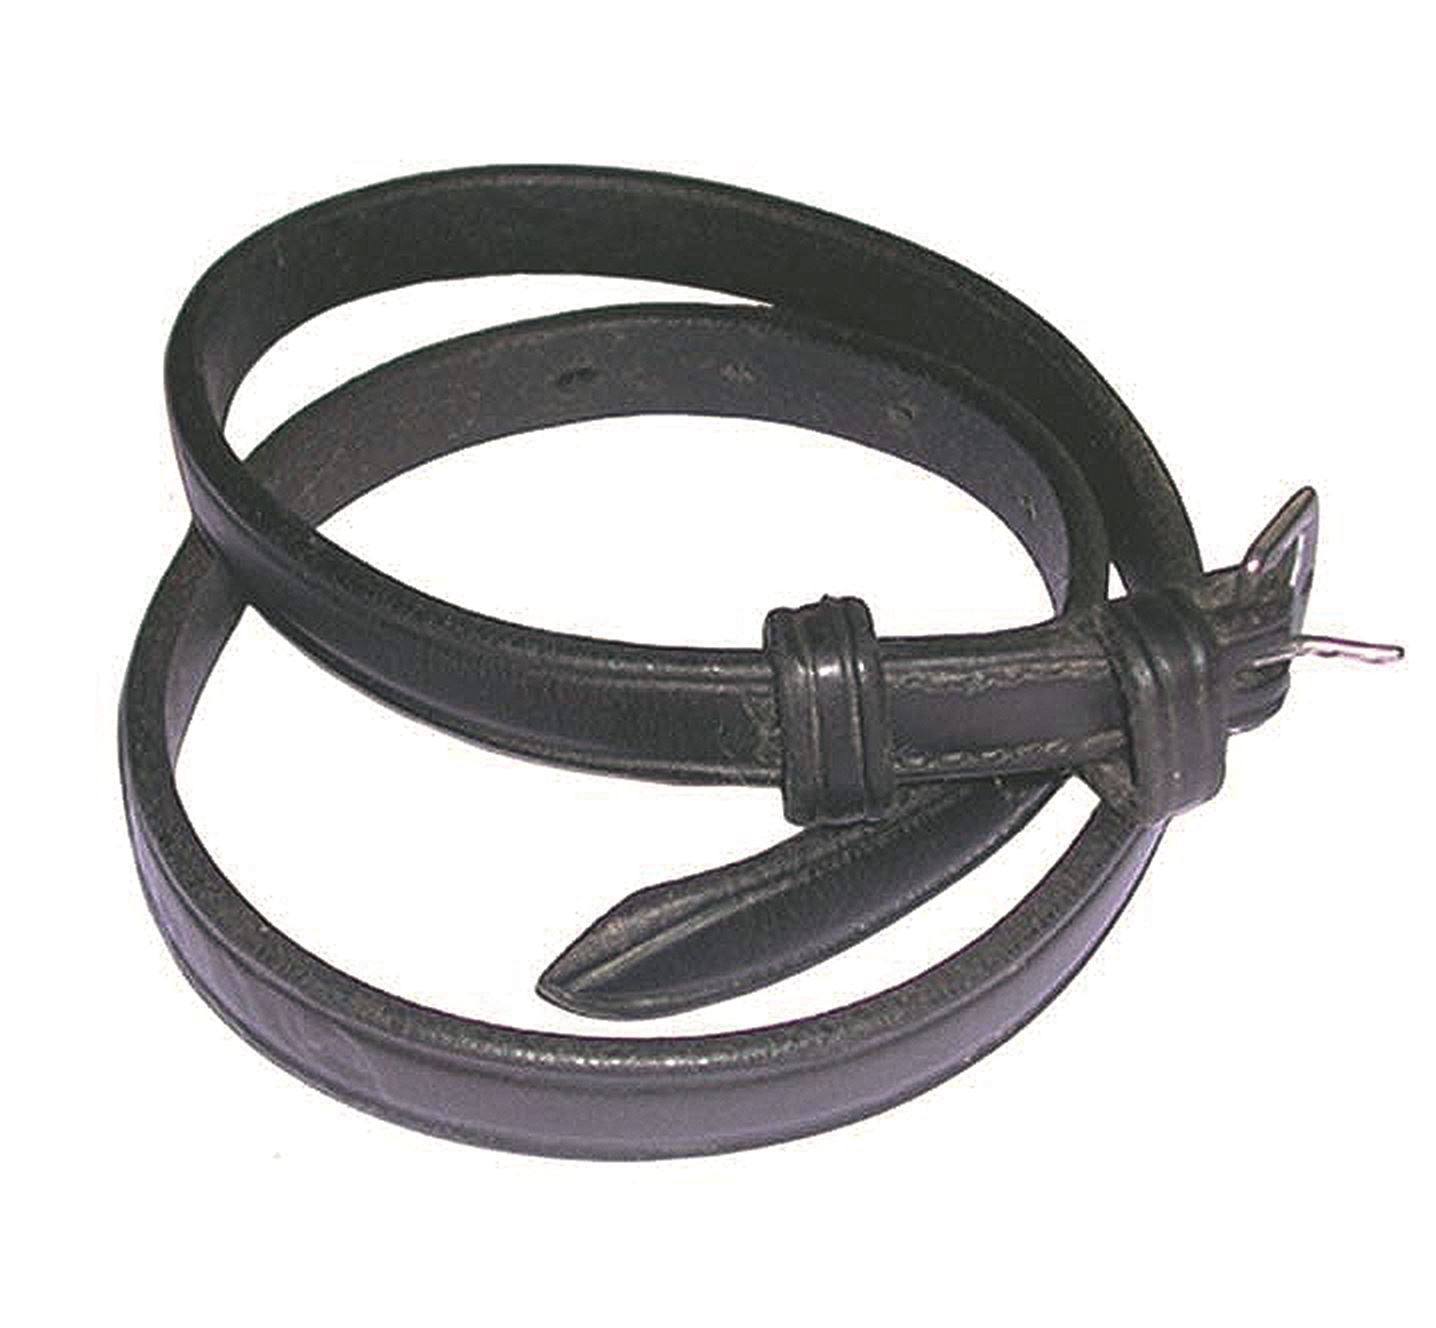 JHL Flash Replacement Straps - Just Horse Riders